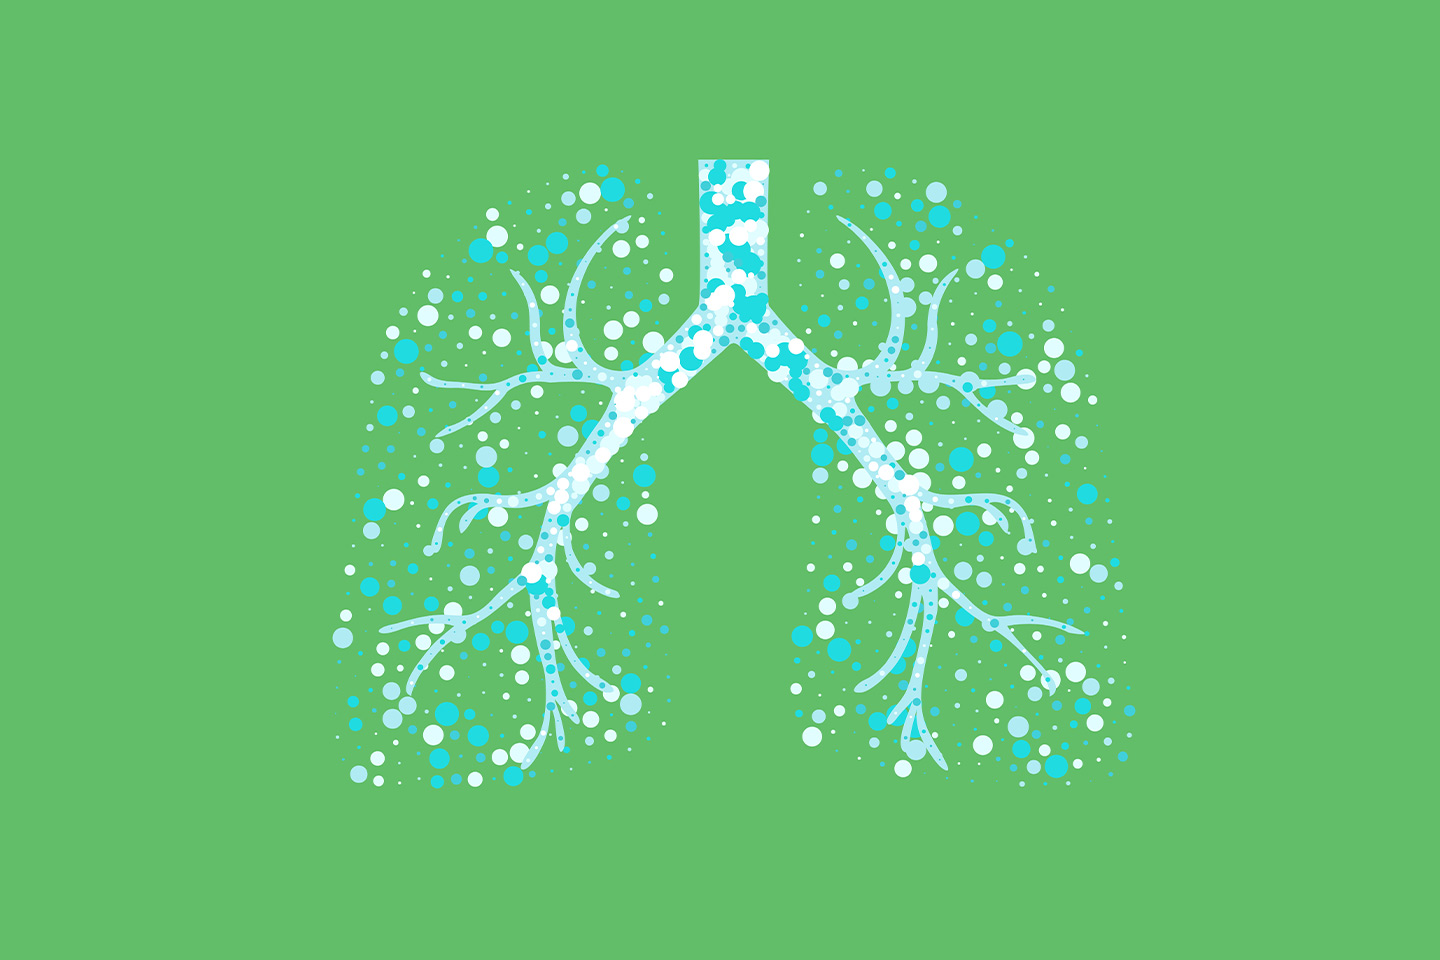 Illustrated graphic of lungs